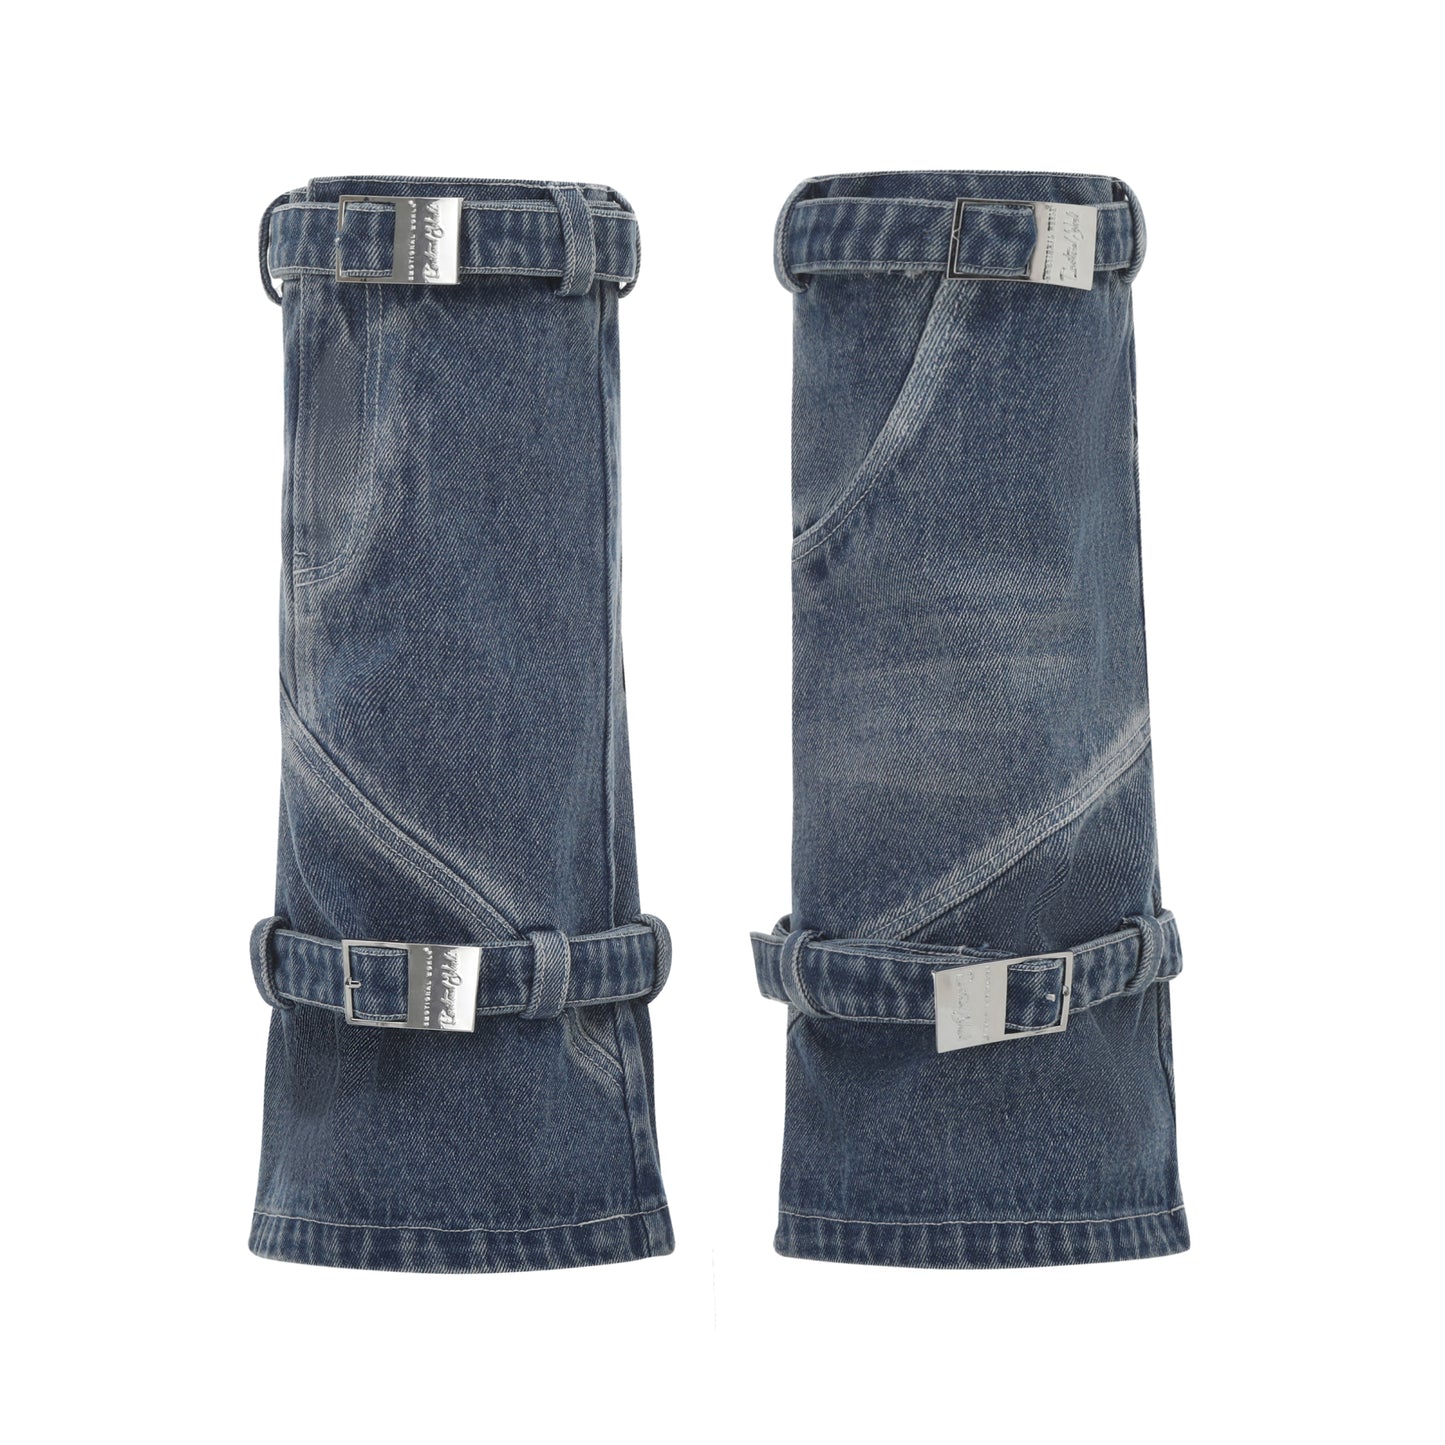 Washed Denim Strapped Leg Warmmers